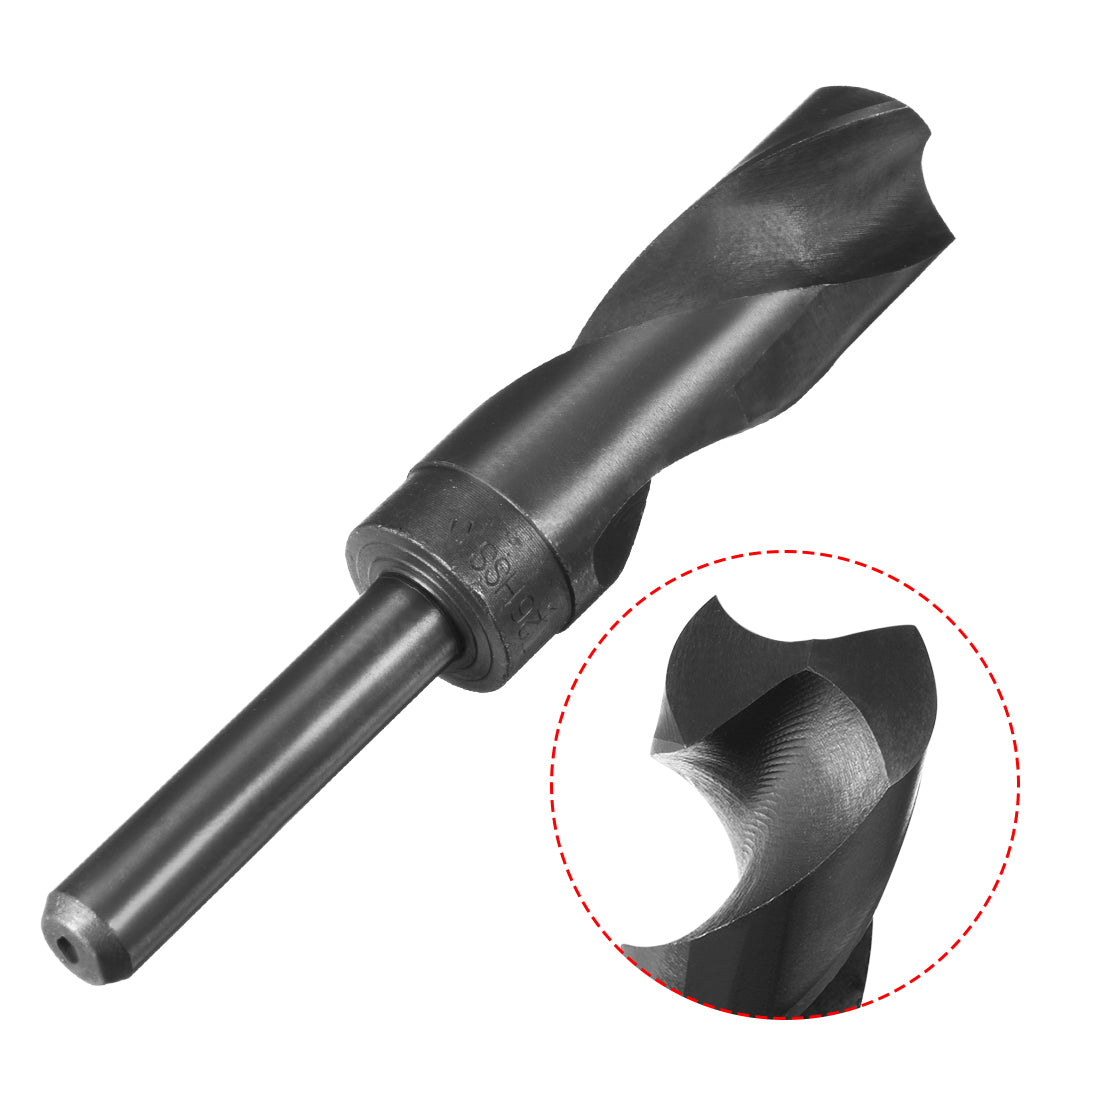 uxcell Uxcell 26mm Drill Bit HSS 9341 Black Oxide with 1/2 Inch Straight Reduced Shank